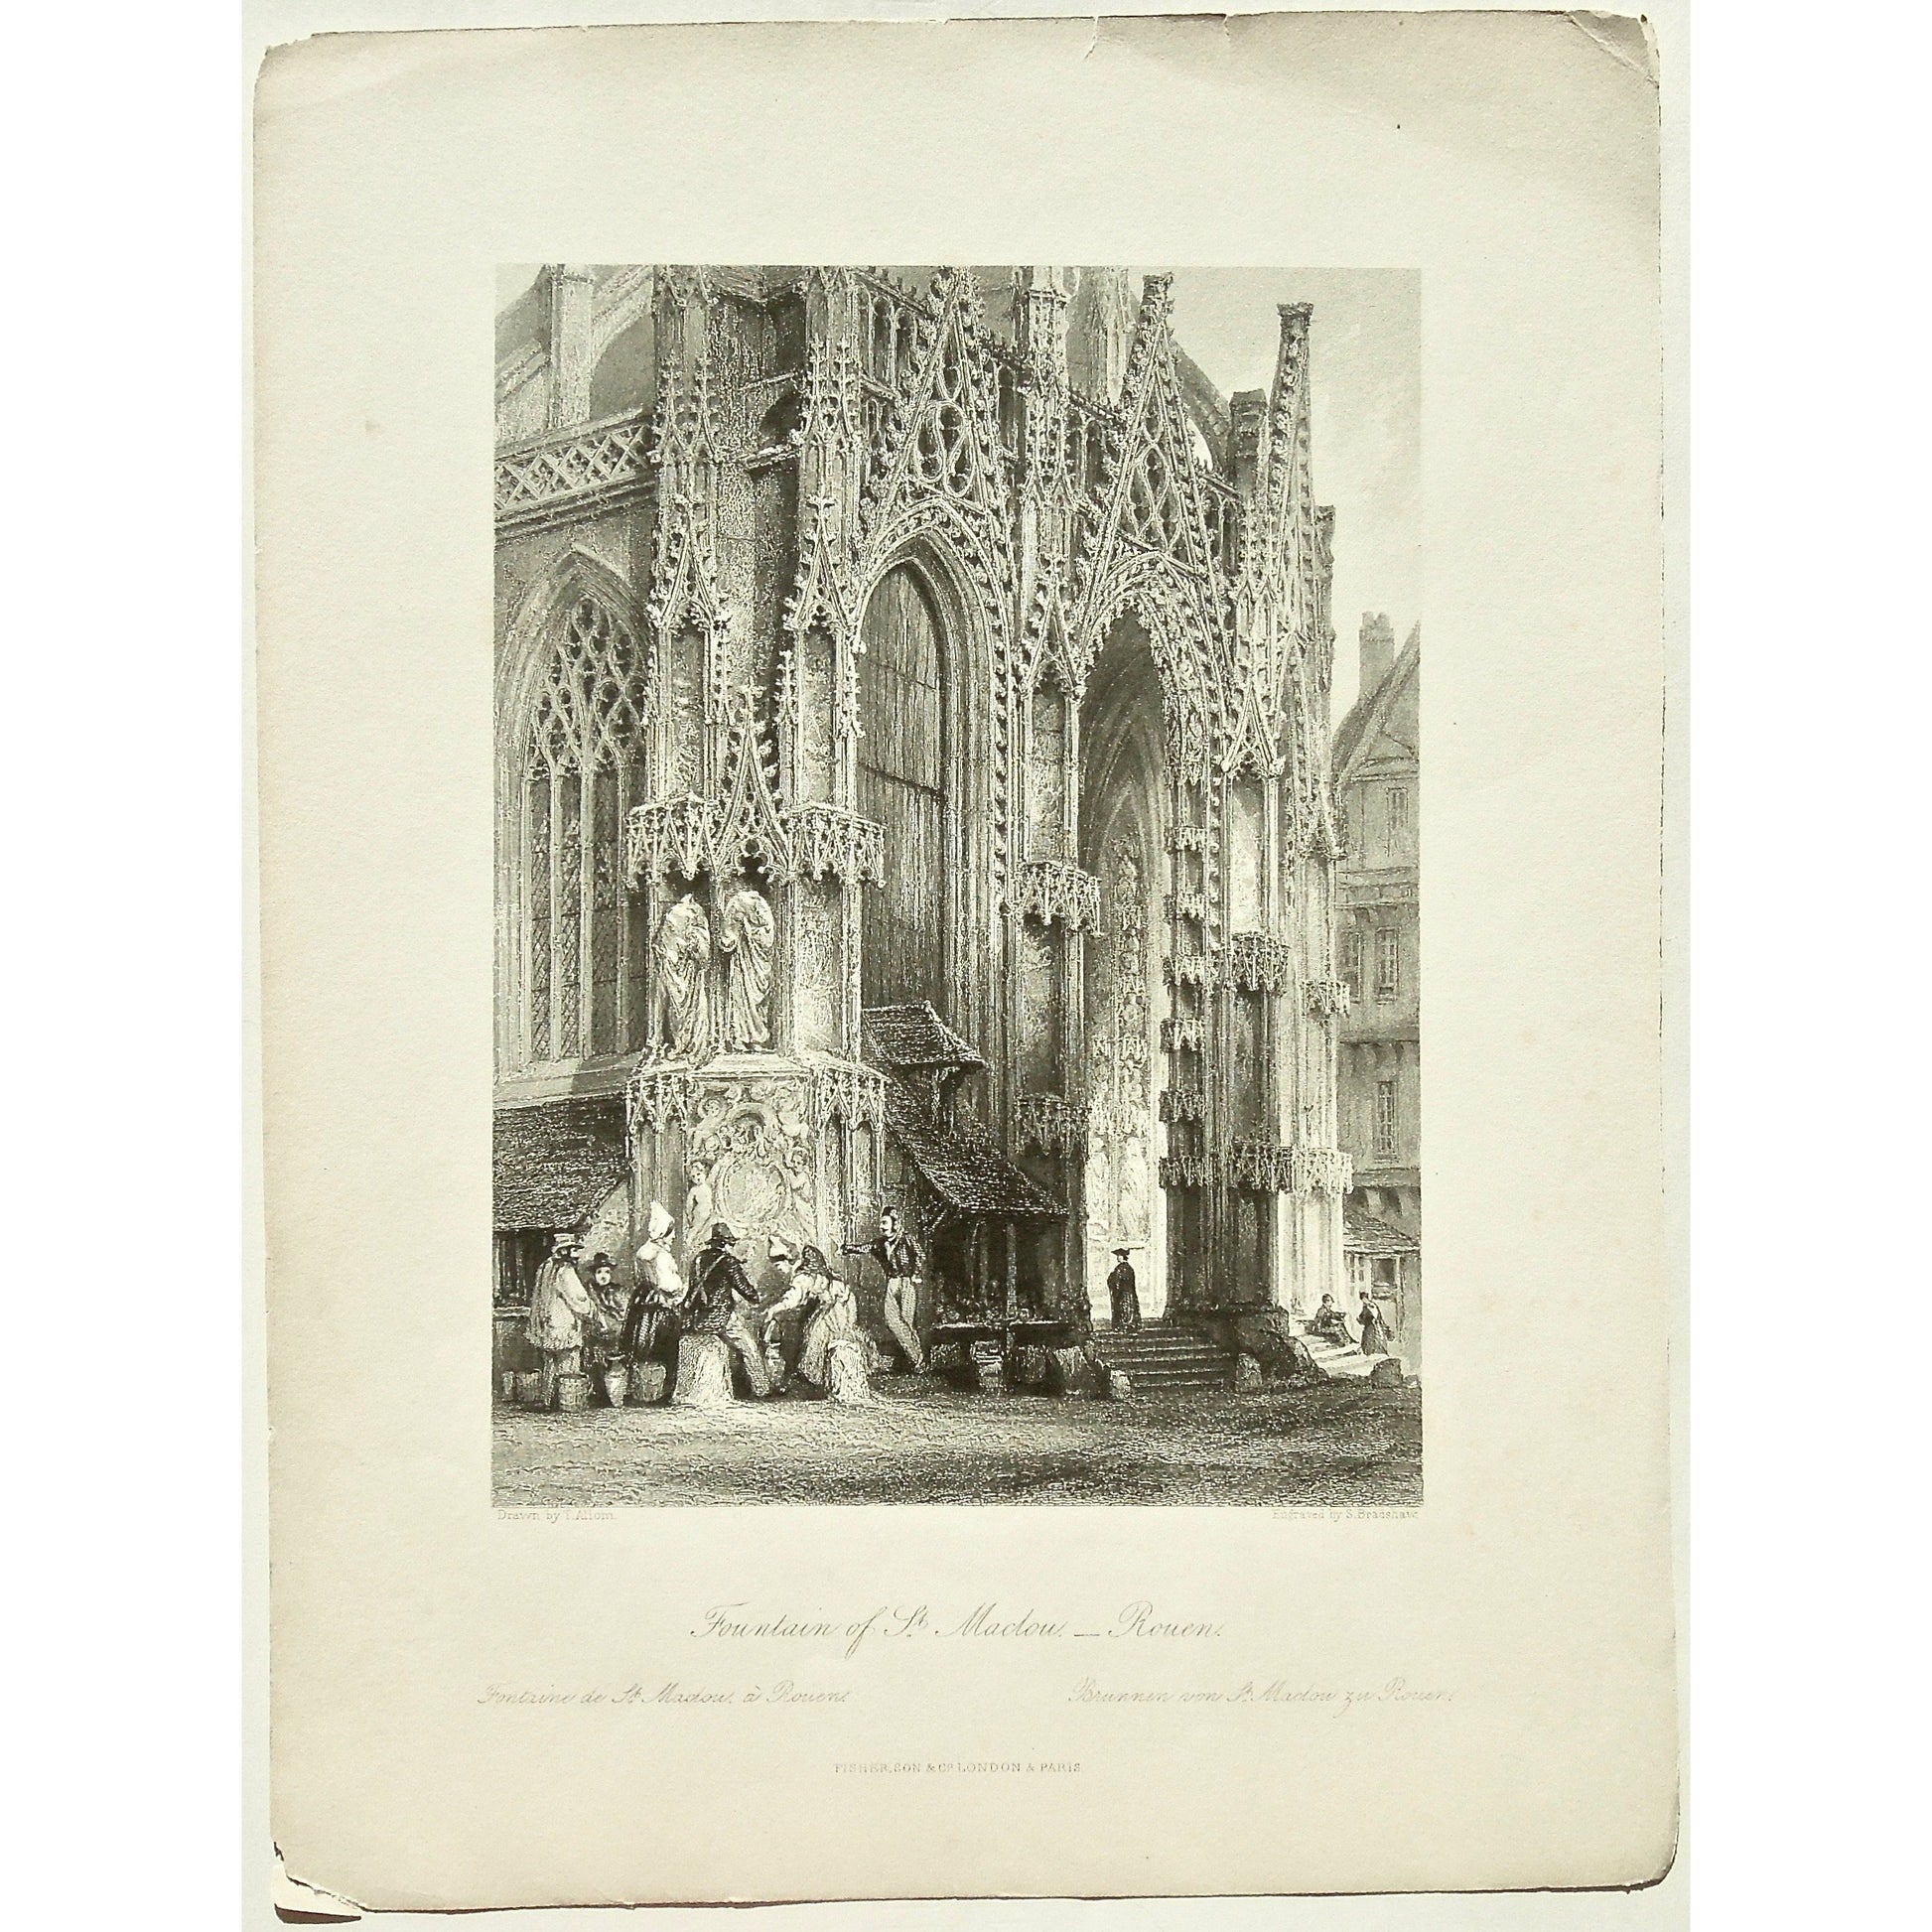 France, France Illustrated, Exhibiting its Landscape Scenery, Antiquities, Military and Ecclesiastical Architecture, Drawings, Thomas Allom, Esq., Allom, Descriptions by The Rev. G. N. Wright, M. A. Vol. III., London, Paris, Reverend George Newenham, Newenham, Caxton Press, Angel St., Martin's-Le-Grand, Mandeville, Neuve Vivienne, 1846, Fountain of St. Maclou, St. Maclou, Fountain, Building, Architecture, Architectural features, gathering, Rouen, Church, Market, Square, Antique, Antique prints, Prints, arts